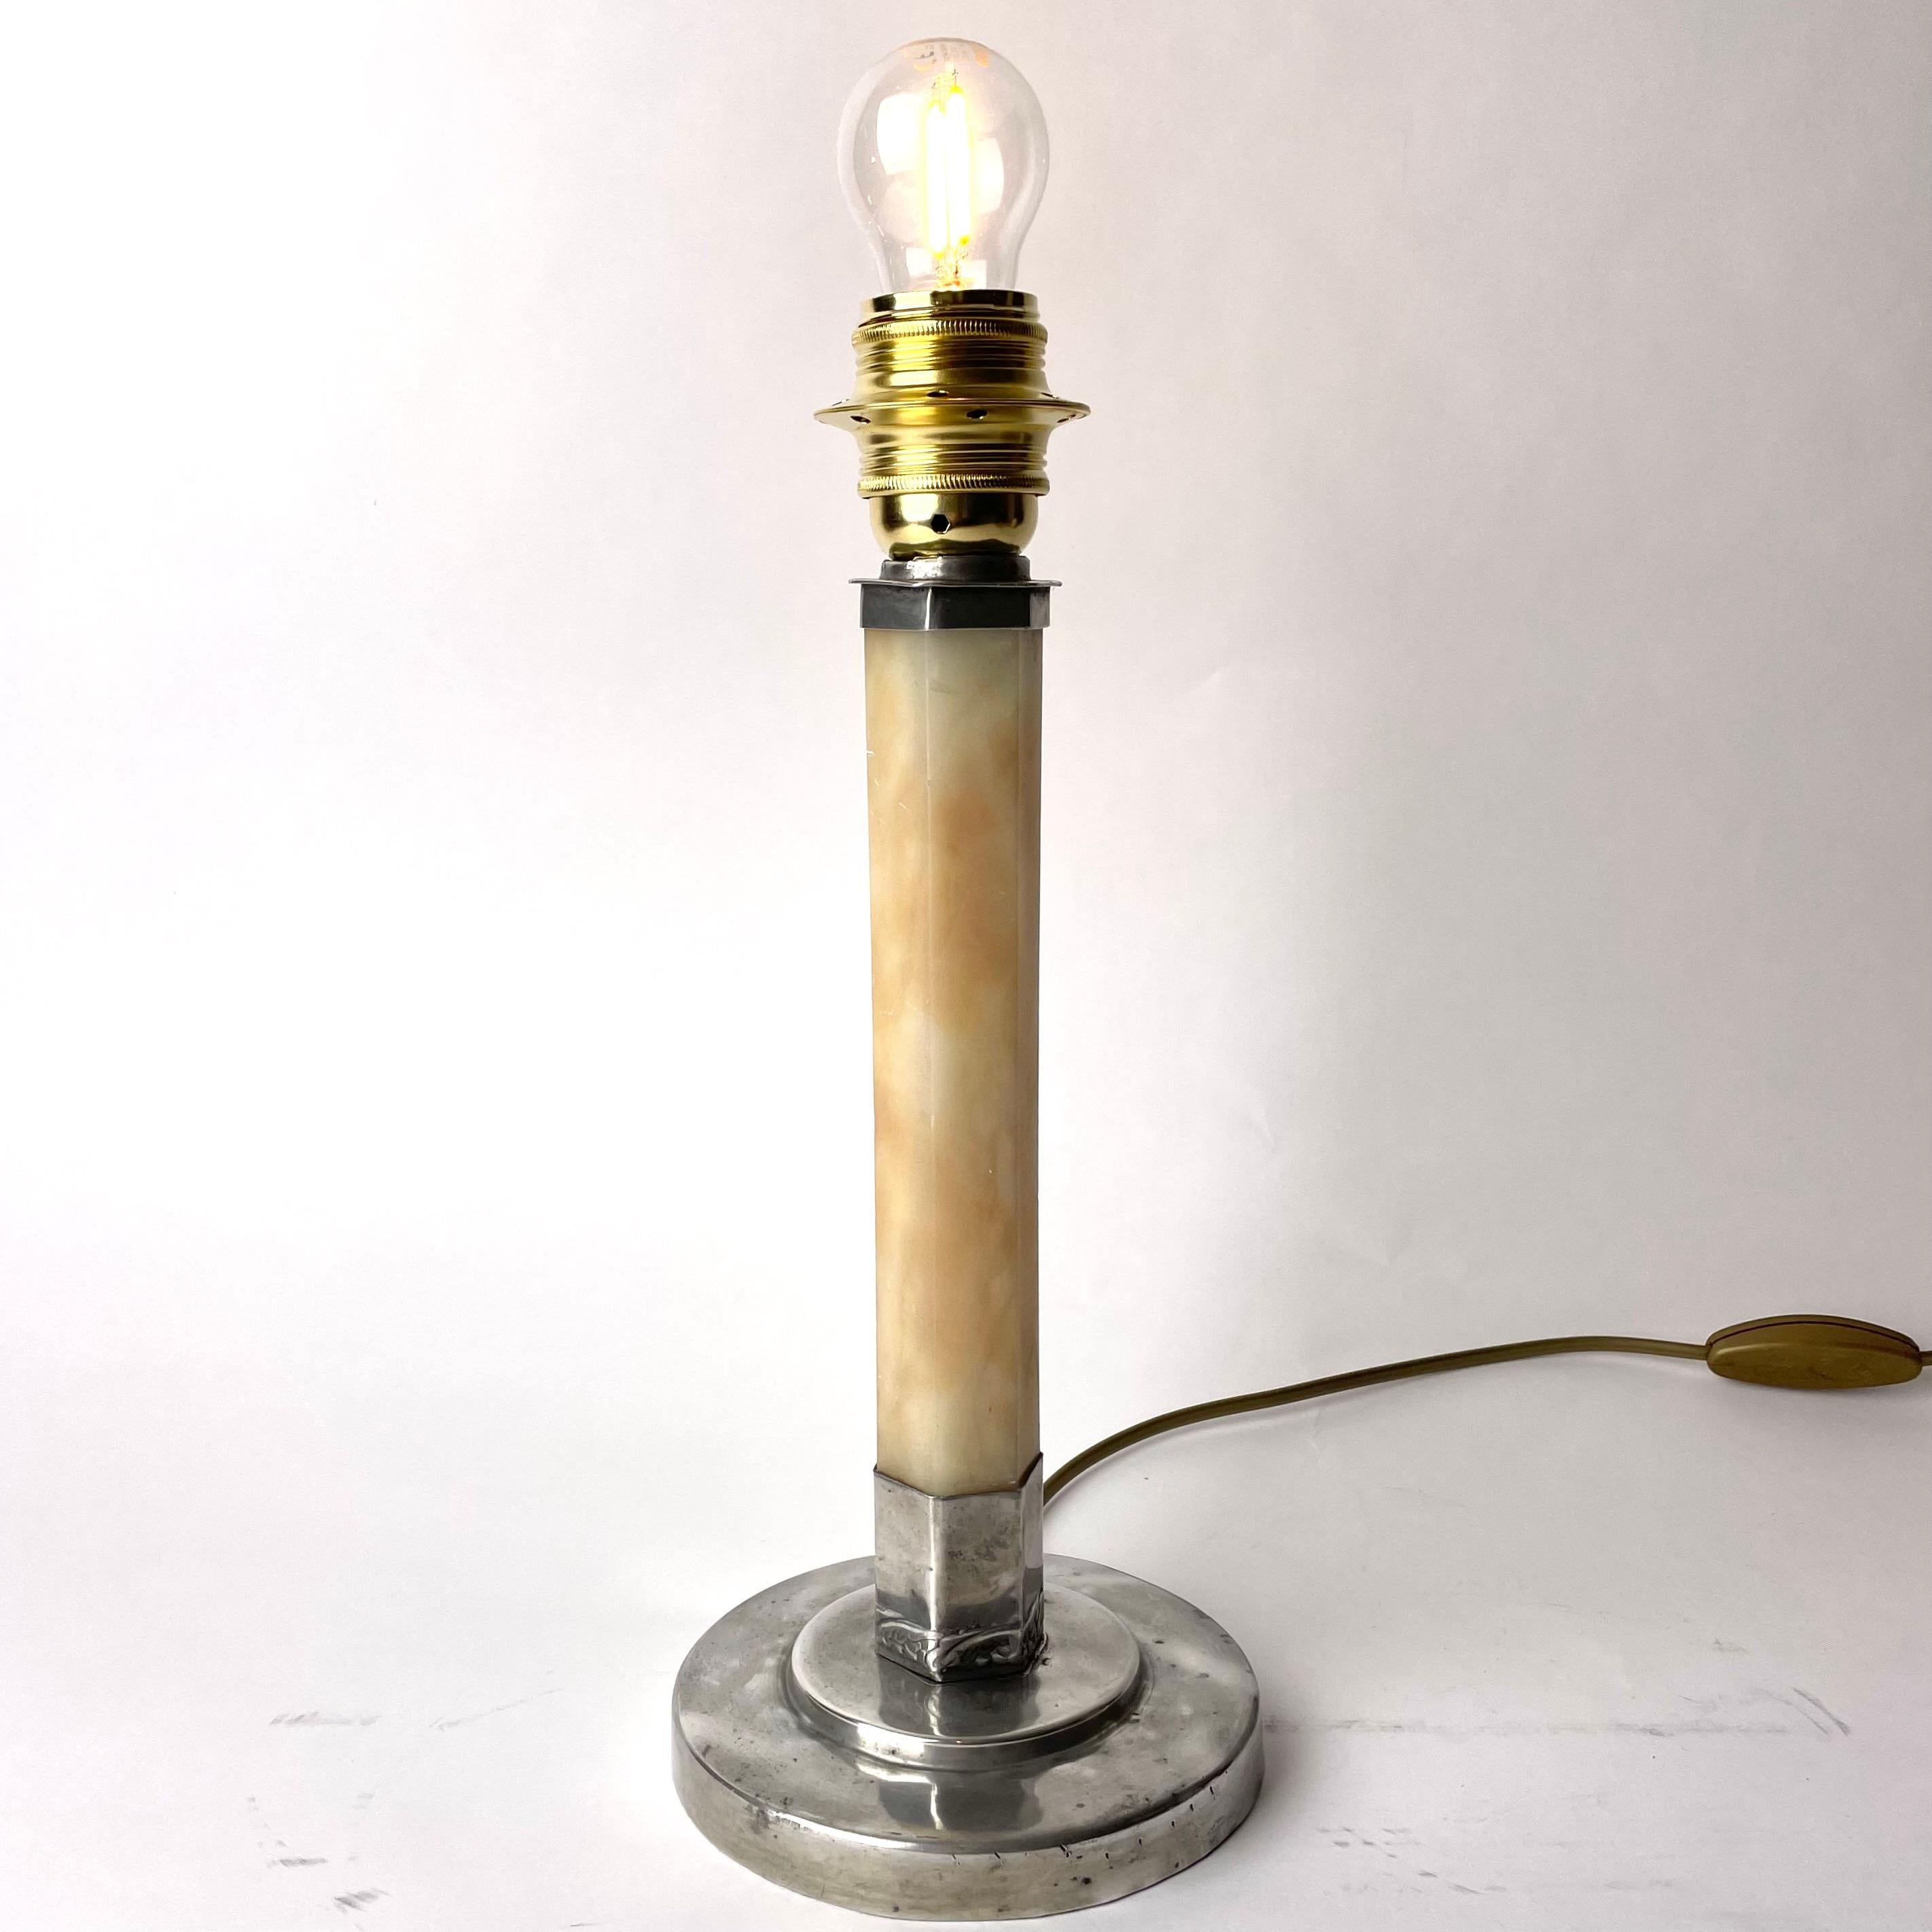 Elegant Table Lamp in Pewter and Alabaster. Swedish Grace 1920s-1930s. The table lamp has some patina with some minor bumps, but in good overall condition.

Wear consistent with age and use 